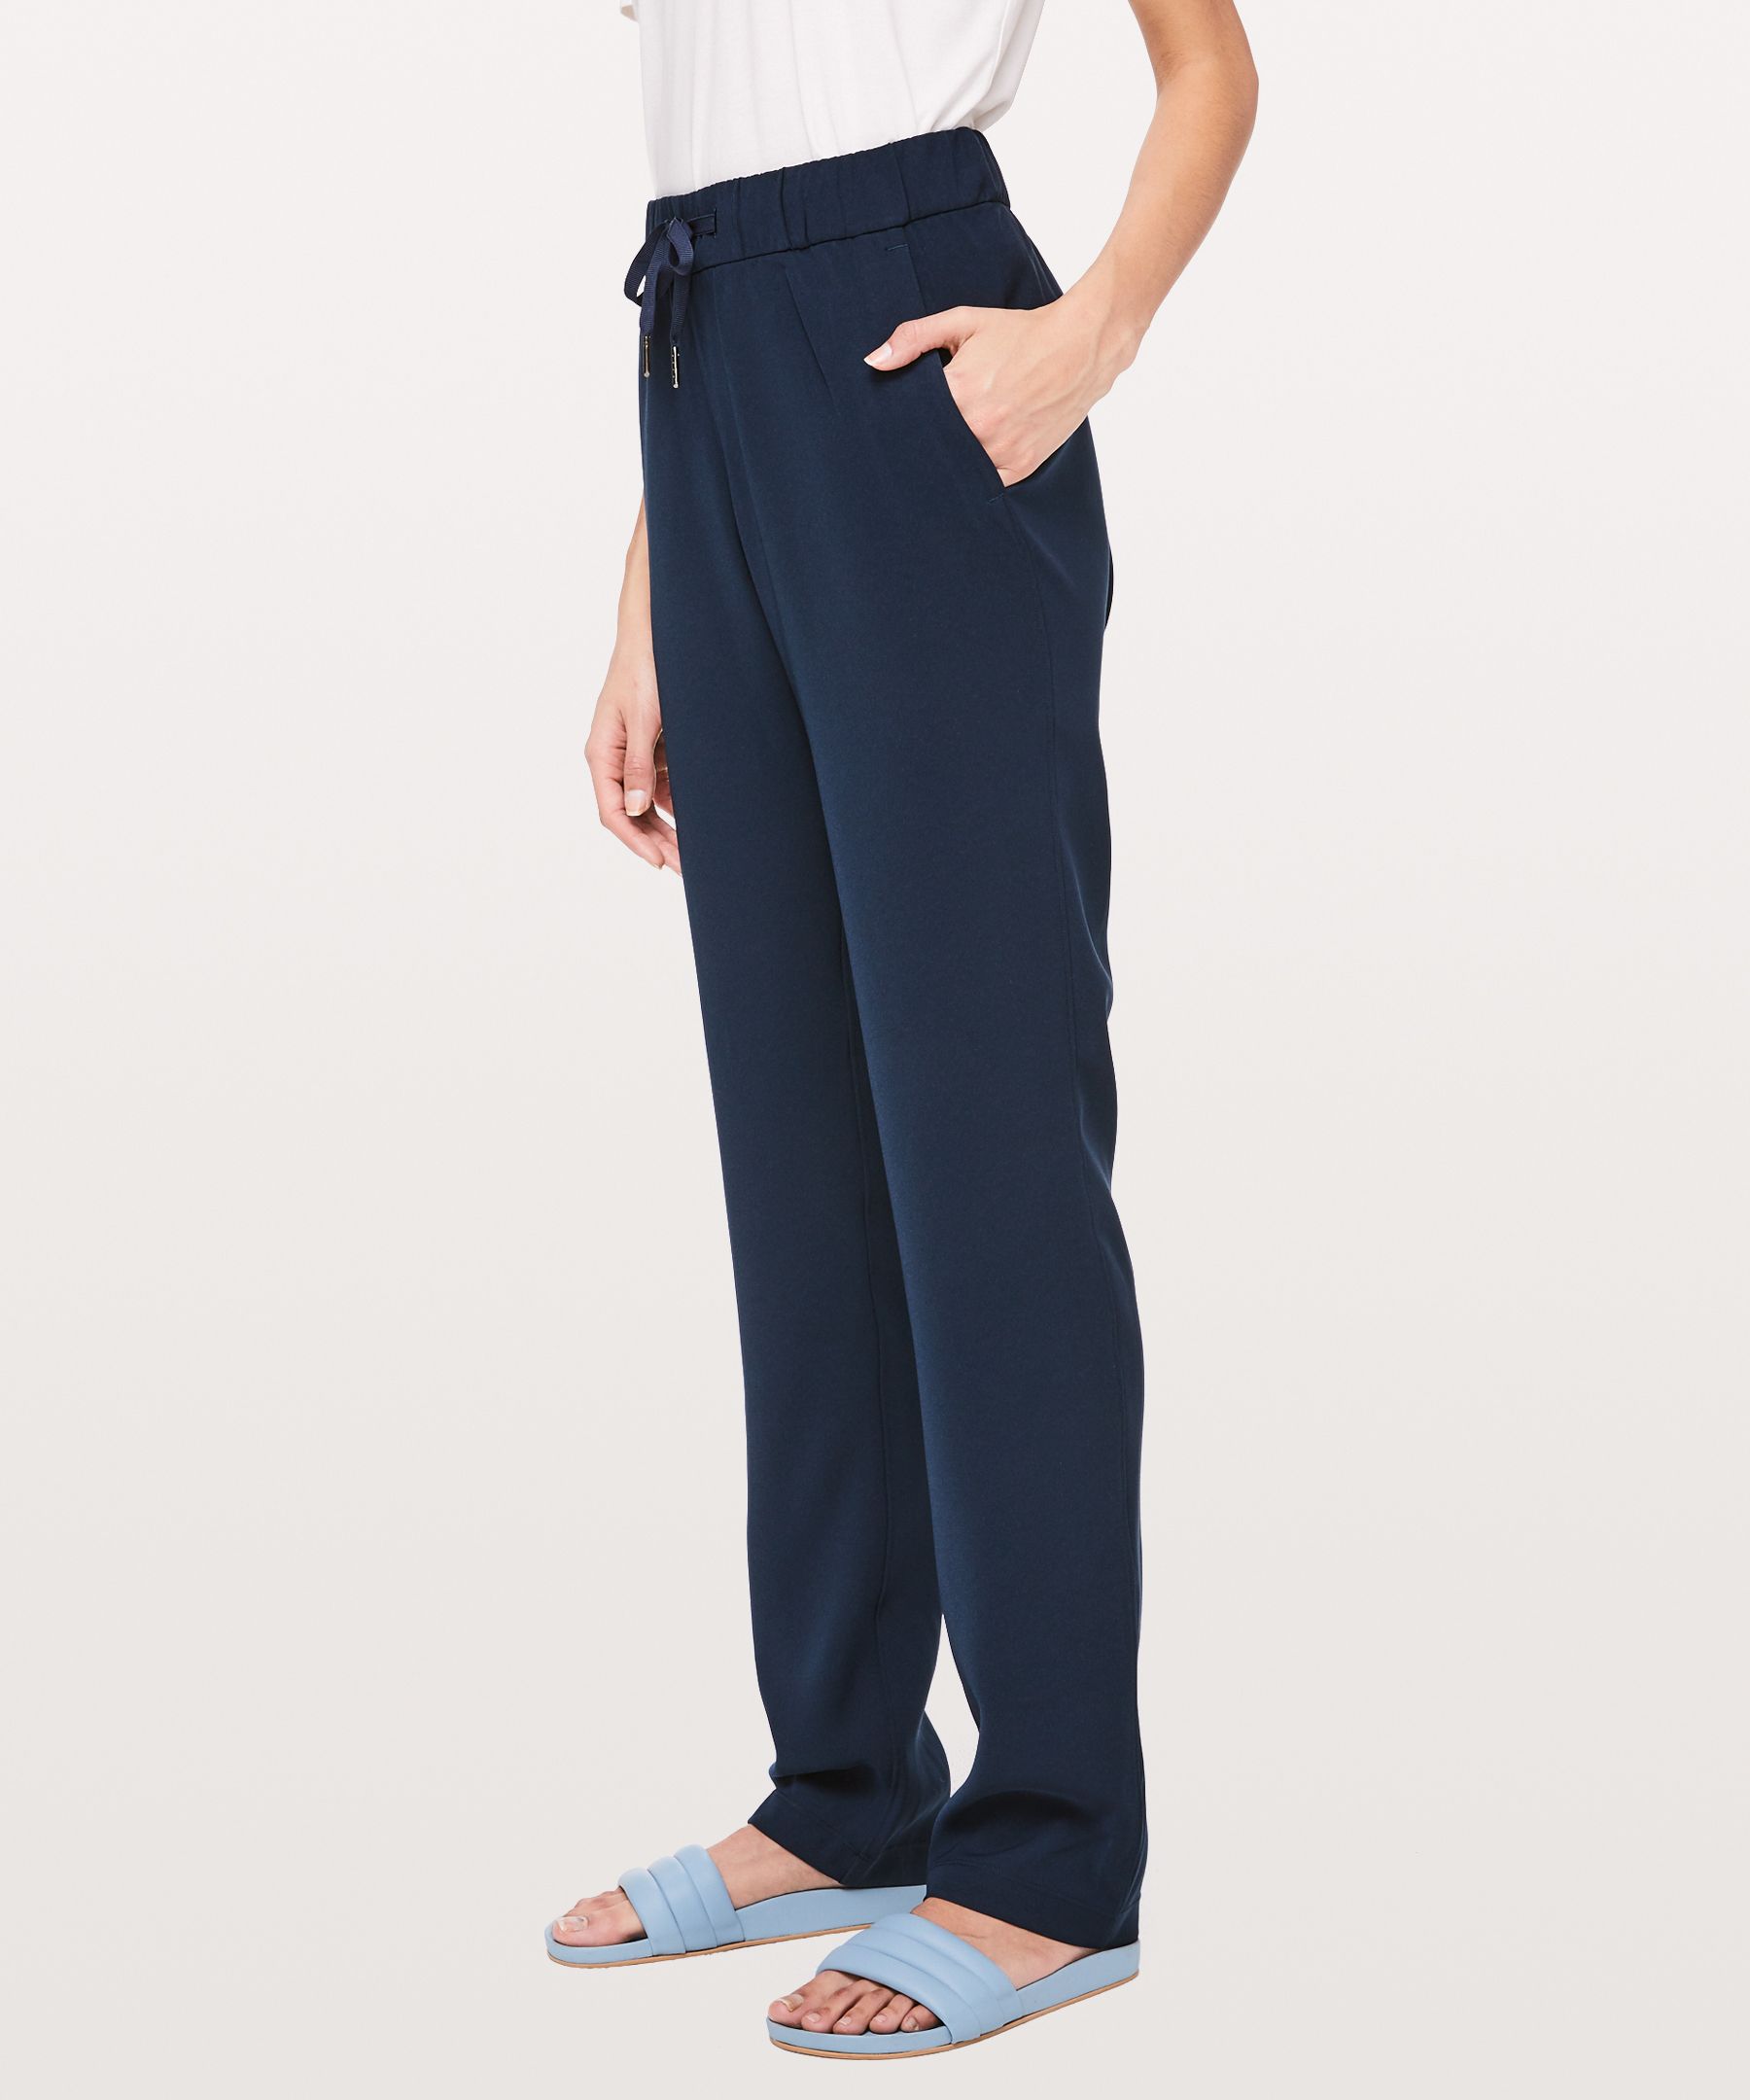 LULULEMON ON THE FLY PANT *ONLINE ONLY WOVEN TALL